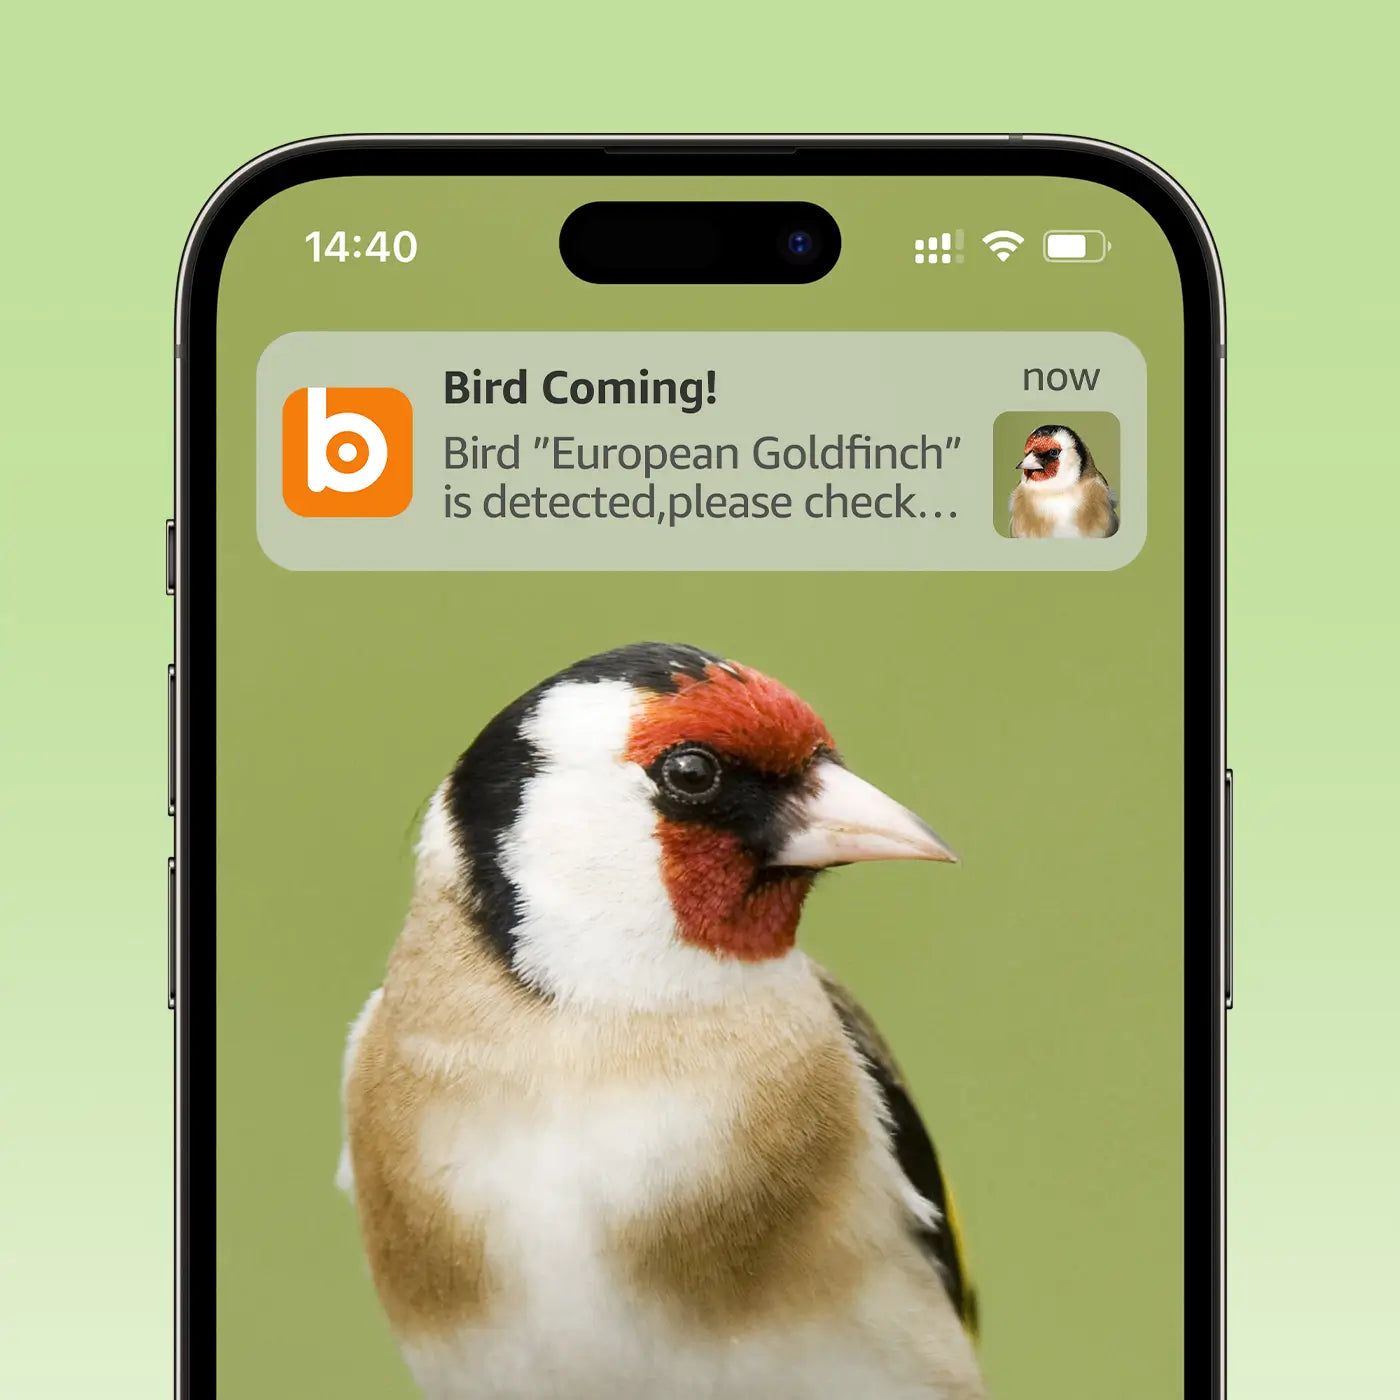 You will be notified whenever a bird comes to visit. Save their cute beautiful images/videos. For collect & share.